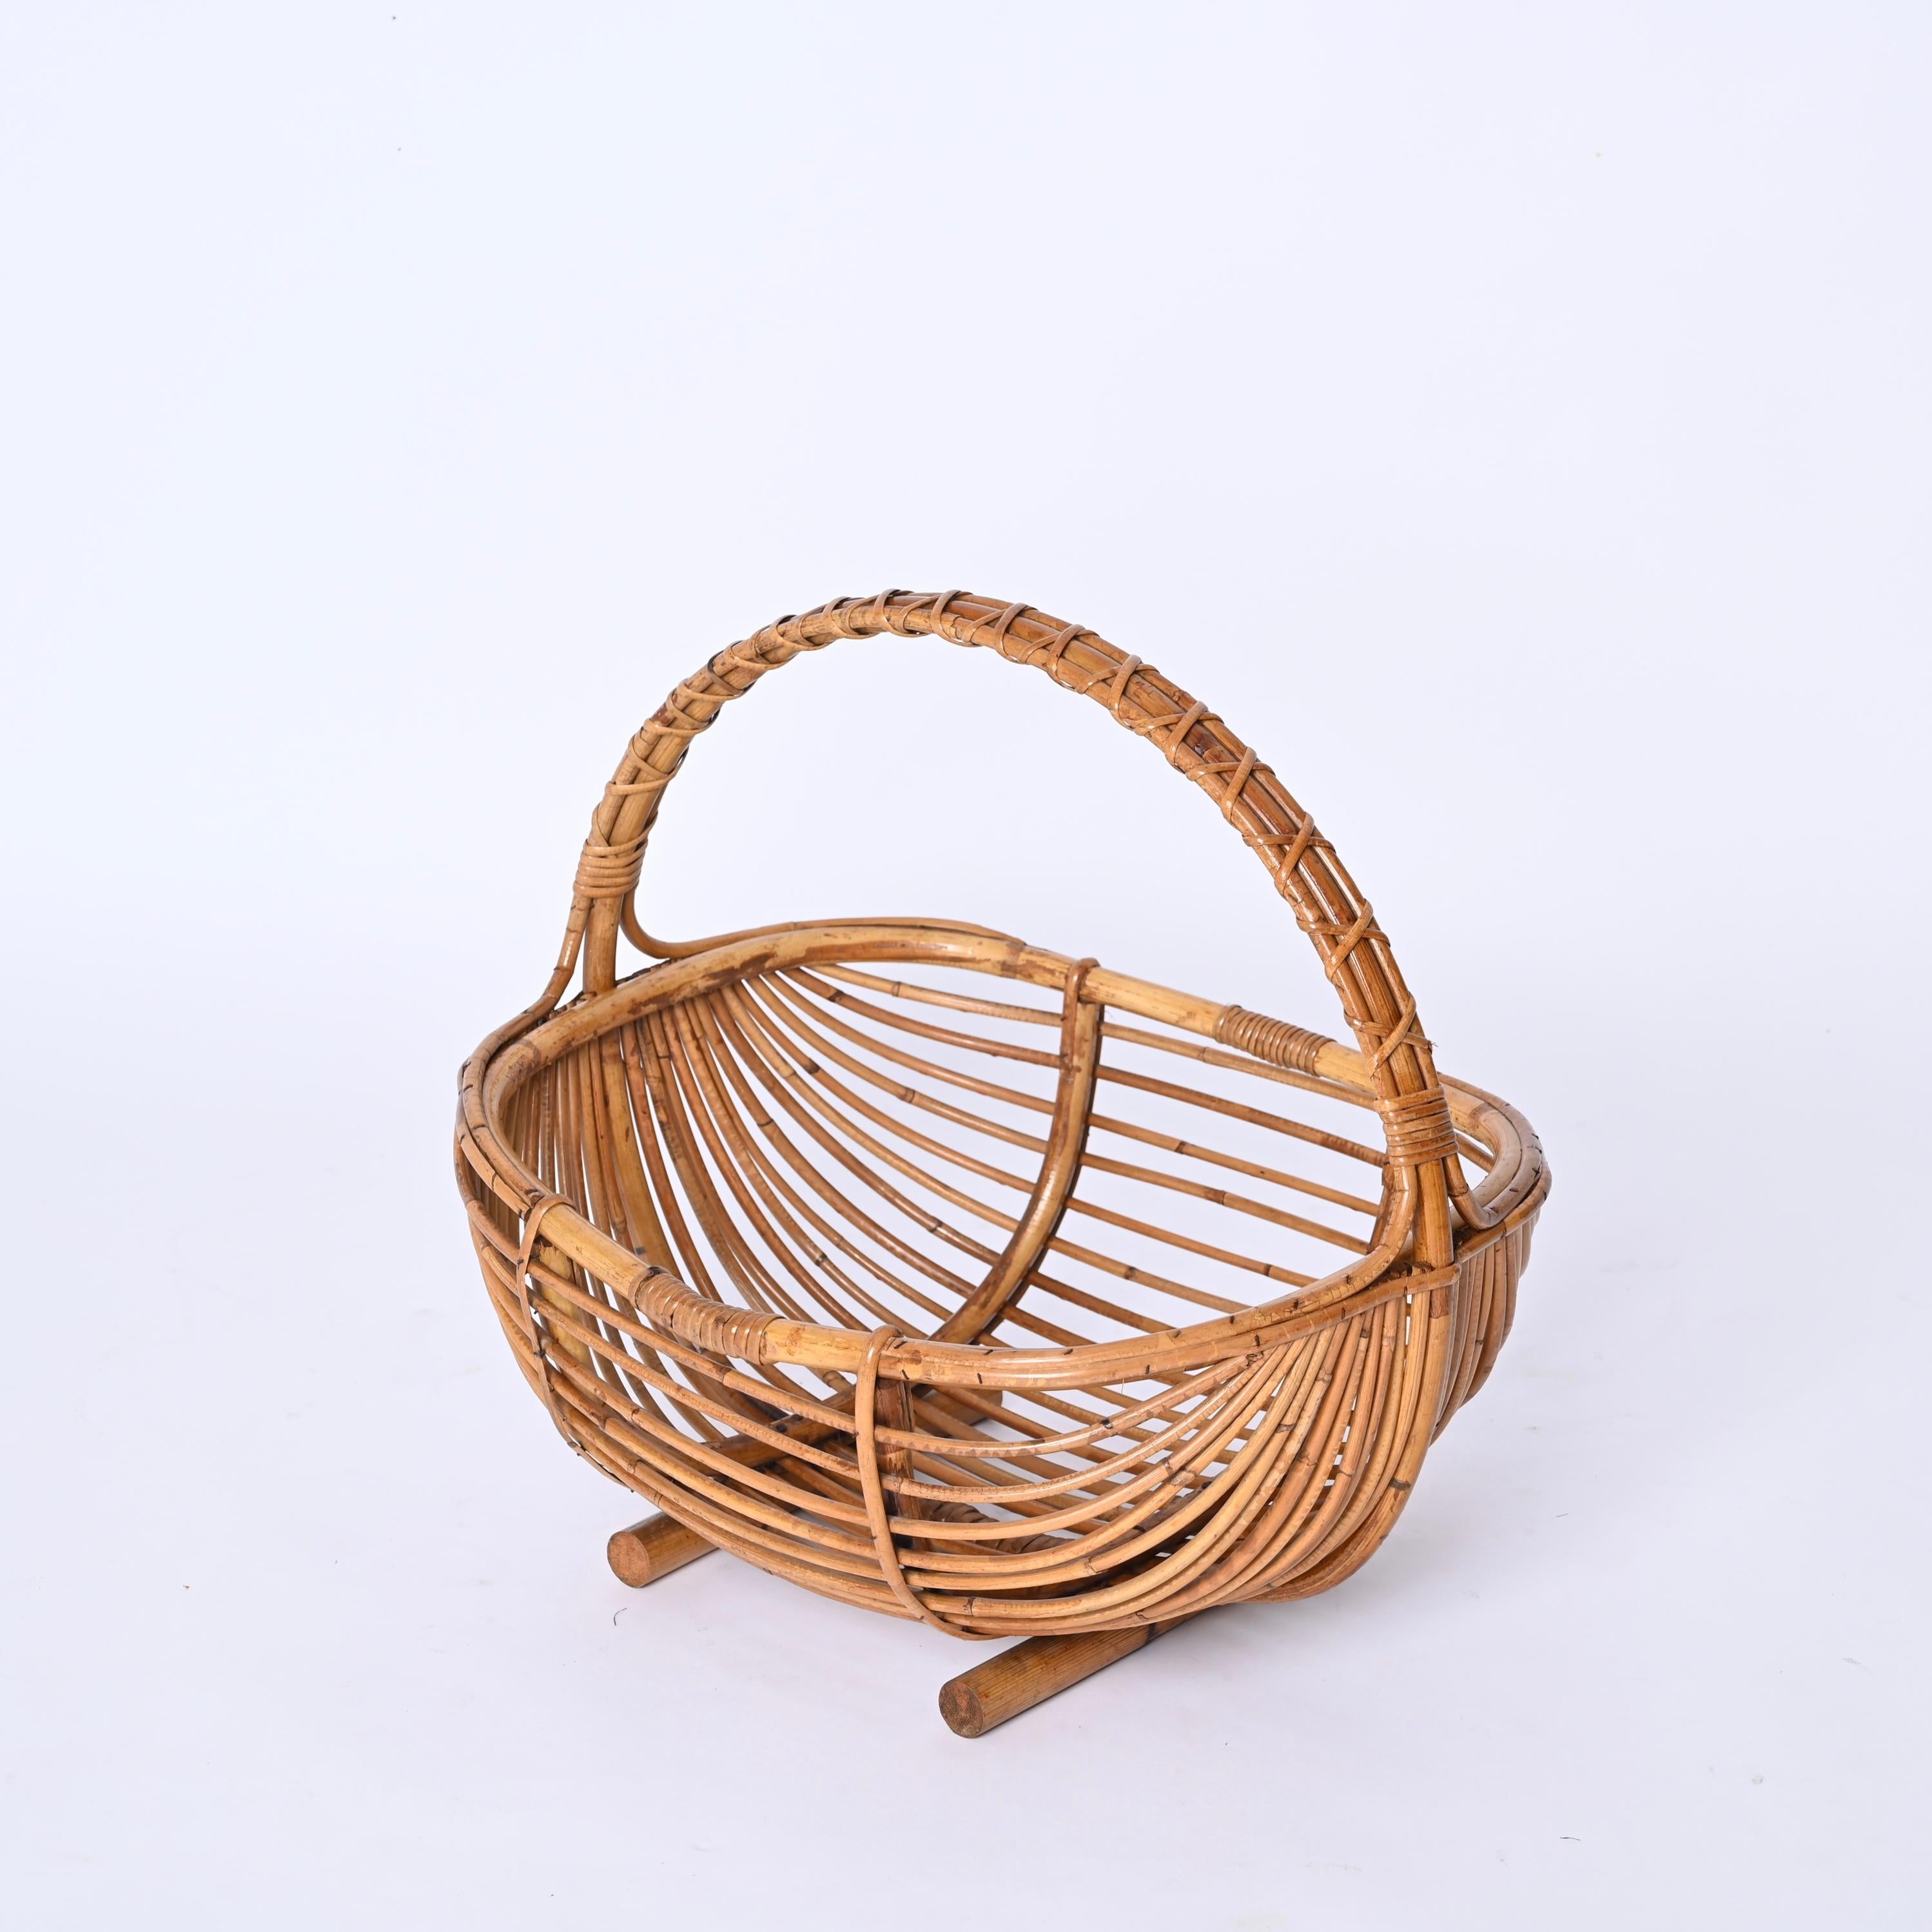 Midcentury French Riviera Magazine Rack in Bamboo and Rattan, Italy 1970s For Sale 3